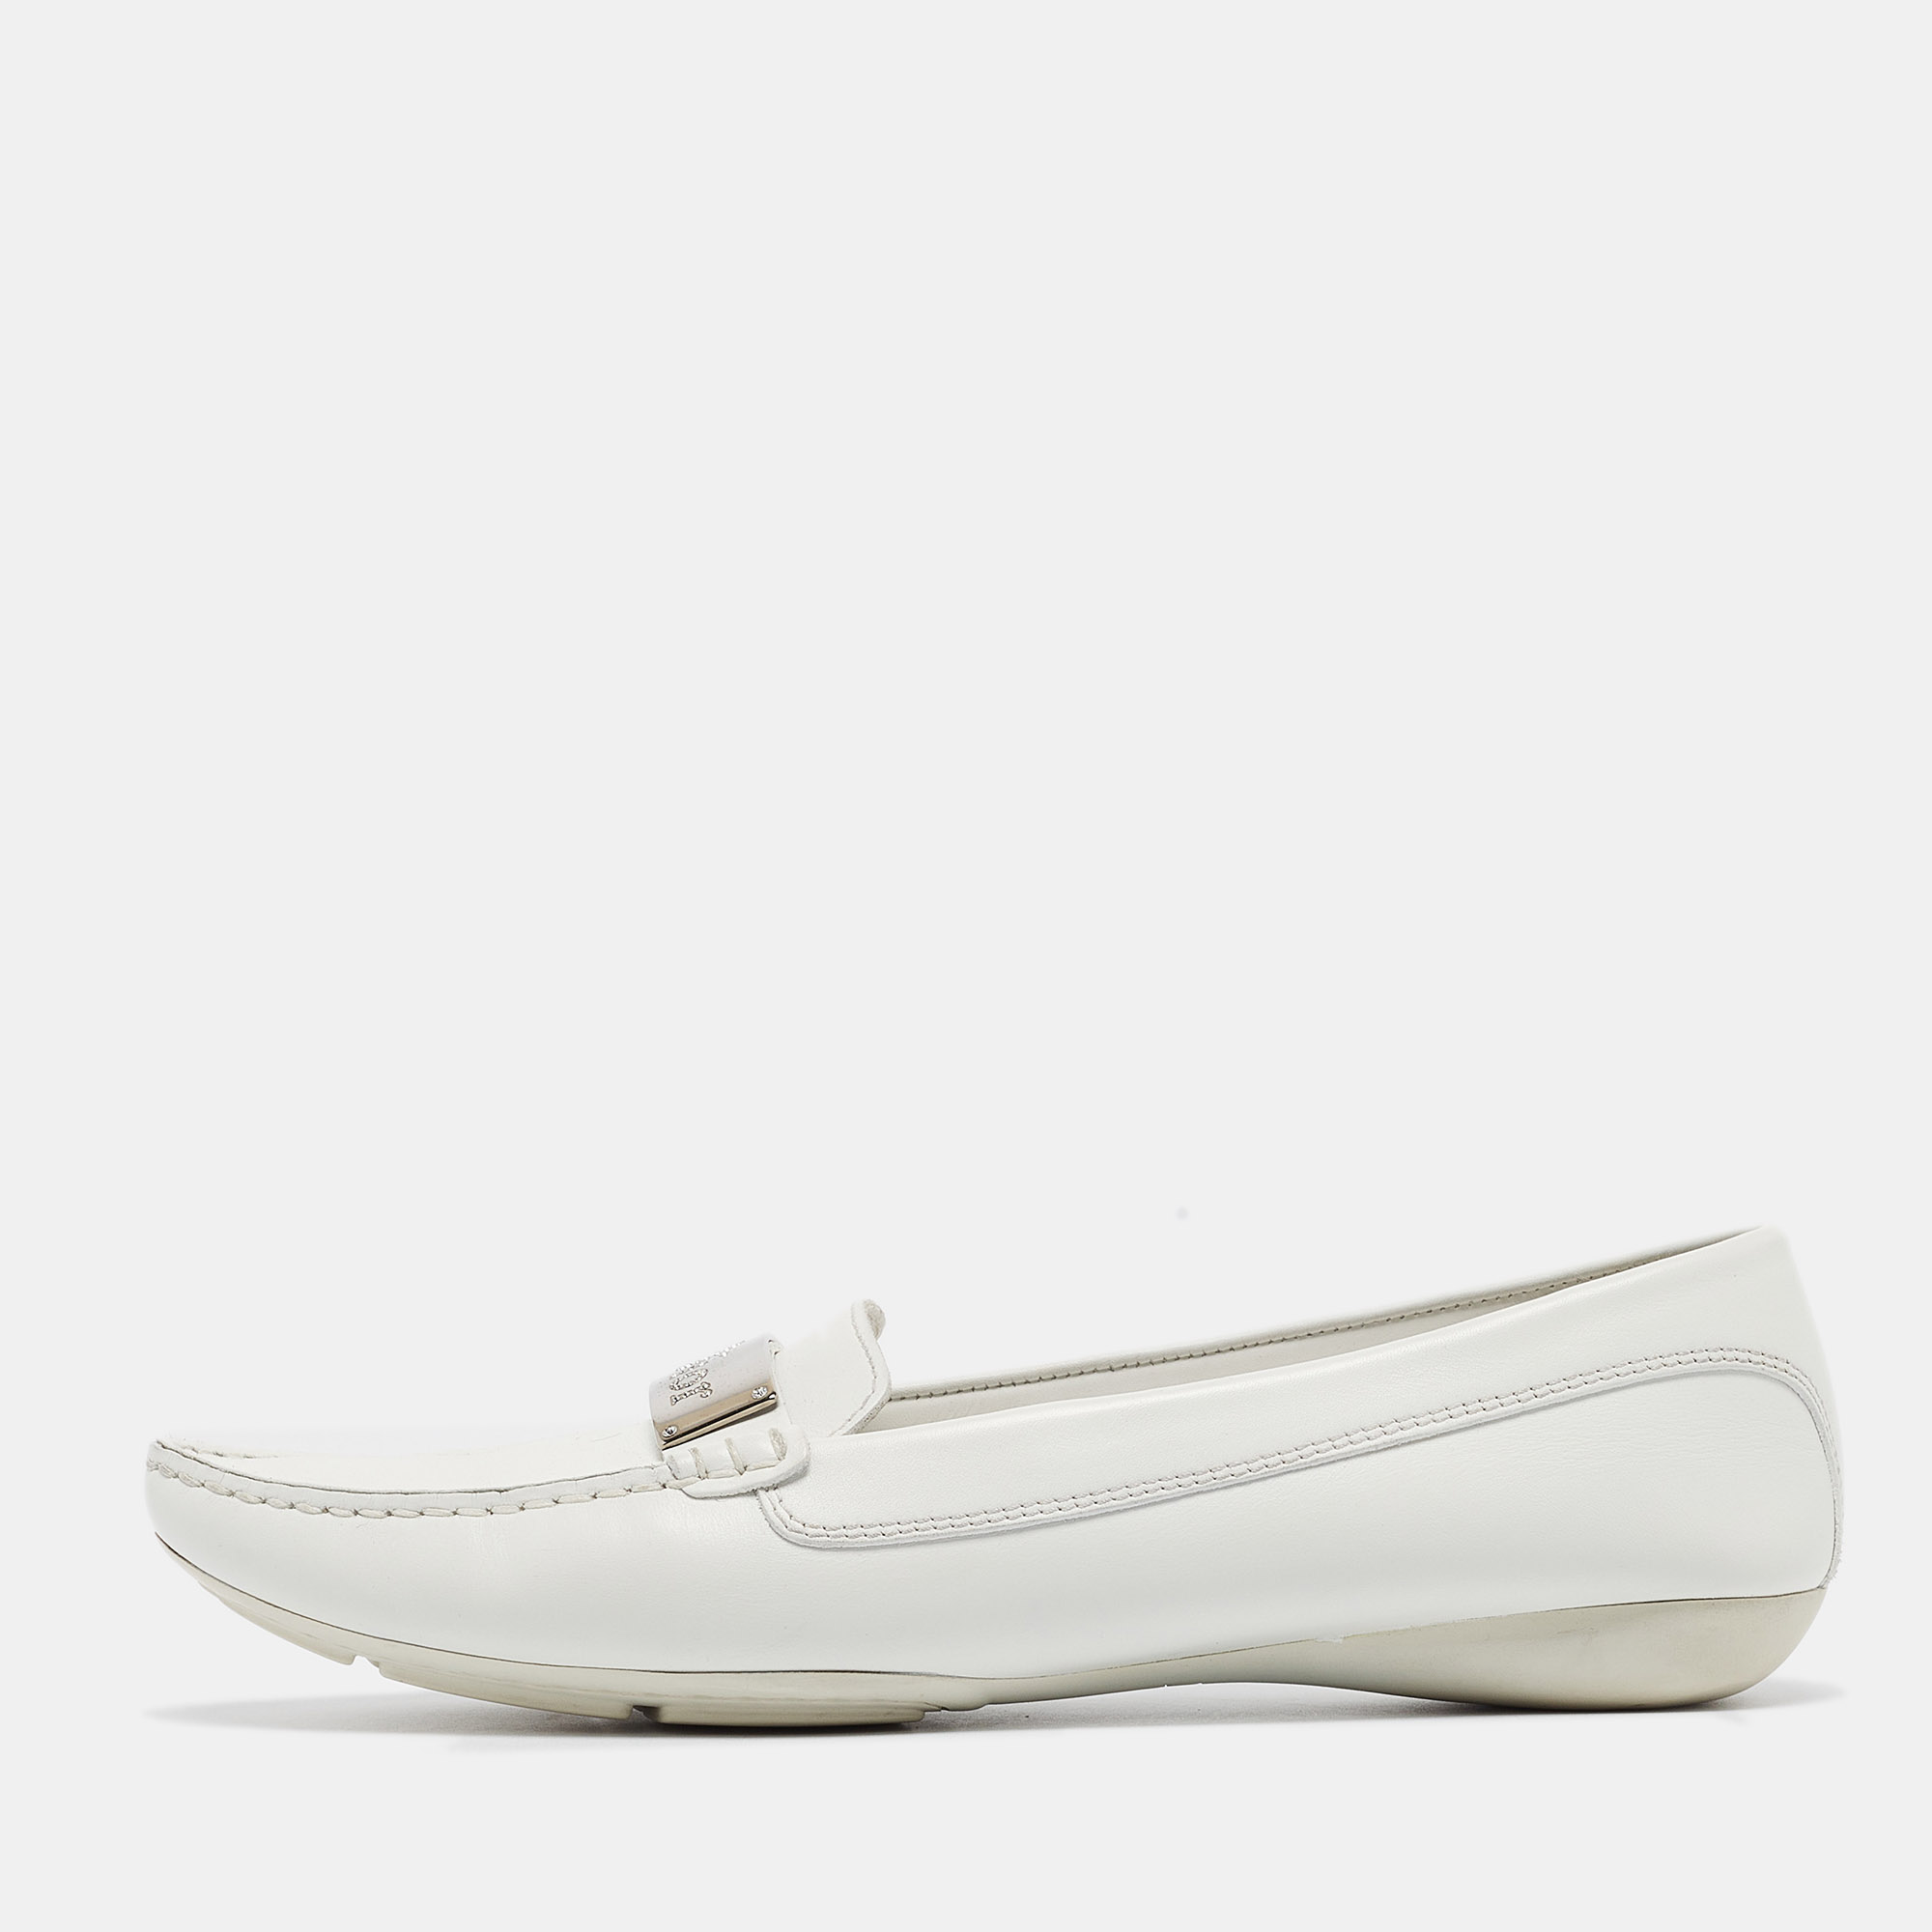 Dior white leather loafers size 39.5